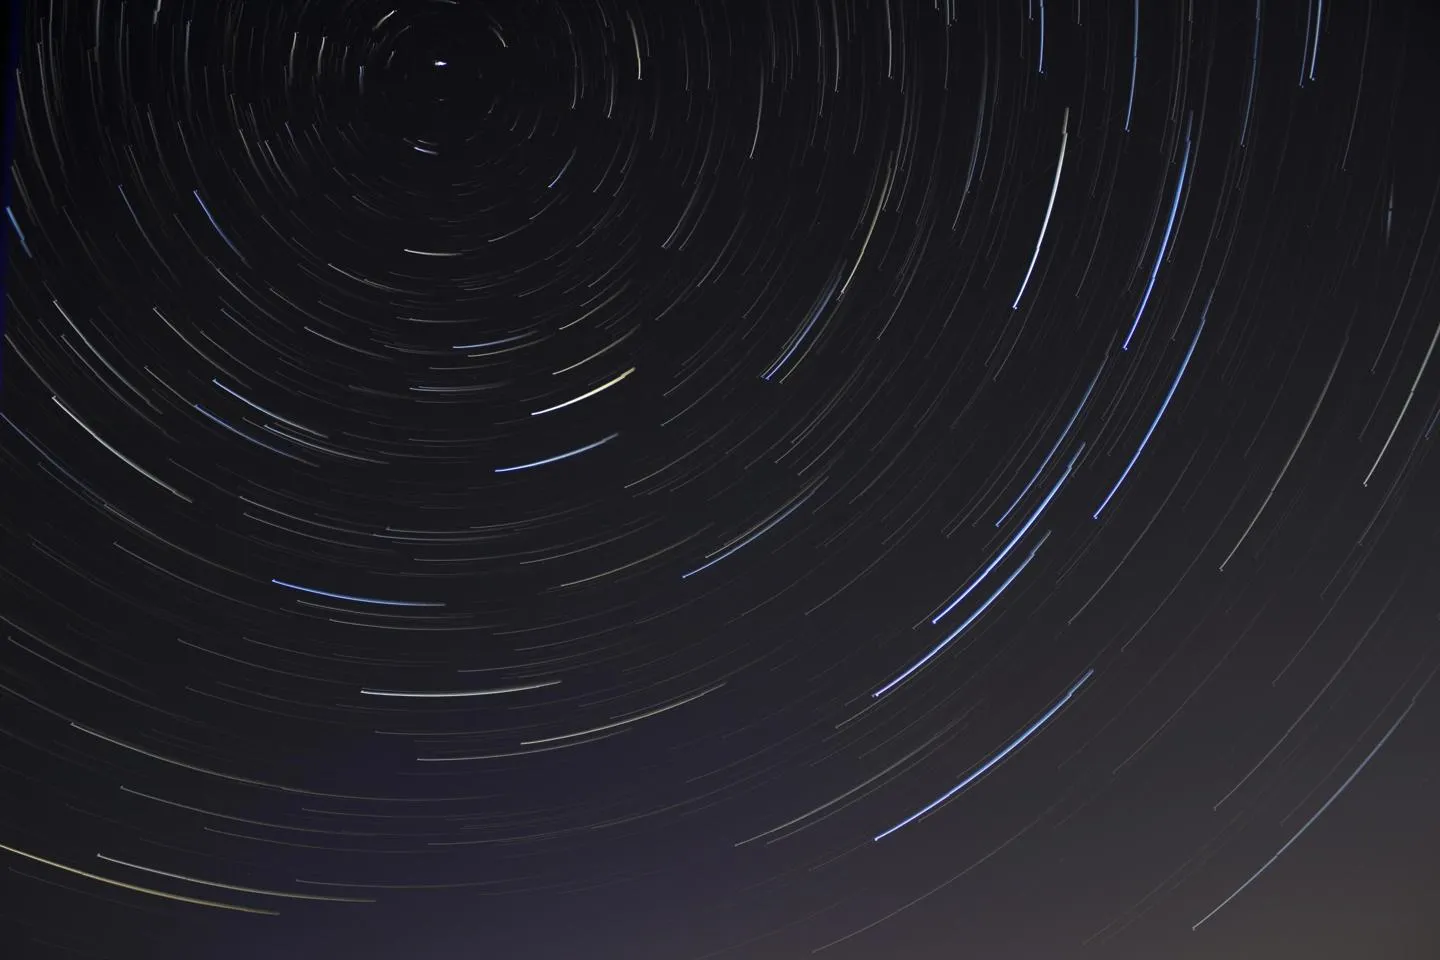 Time lapse of stars in night sky.